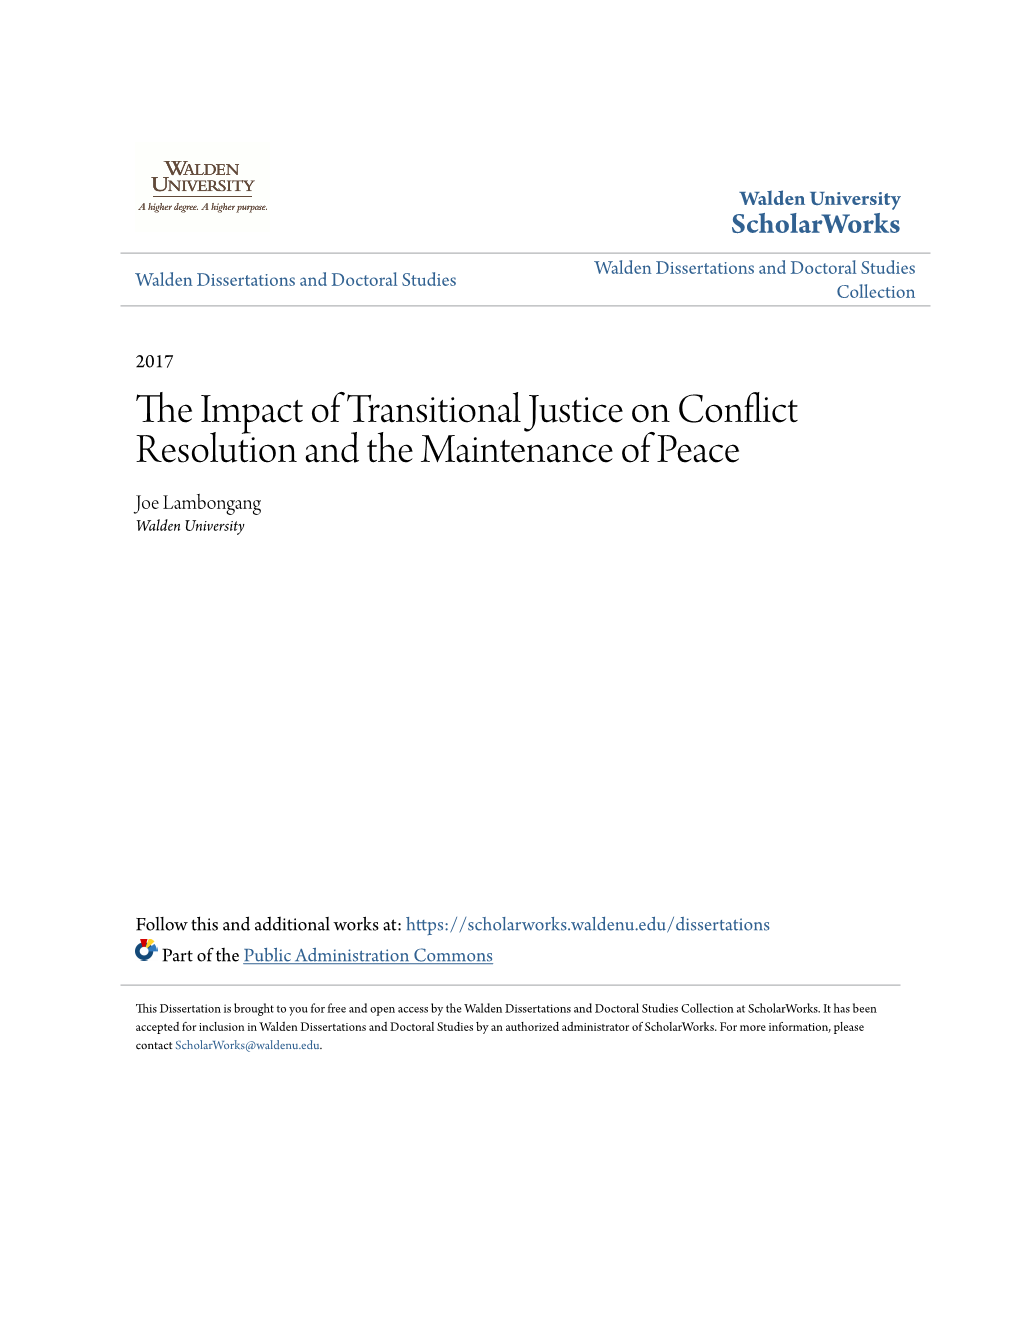 The Impact of Transitional Justice on Conflict Resolution and the Maintenance of Peace